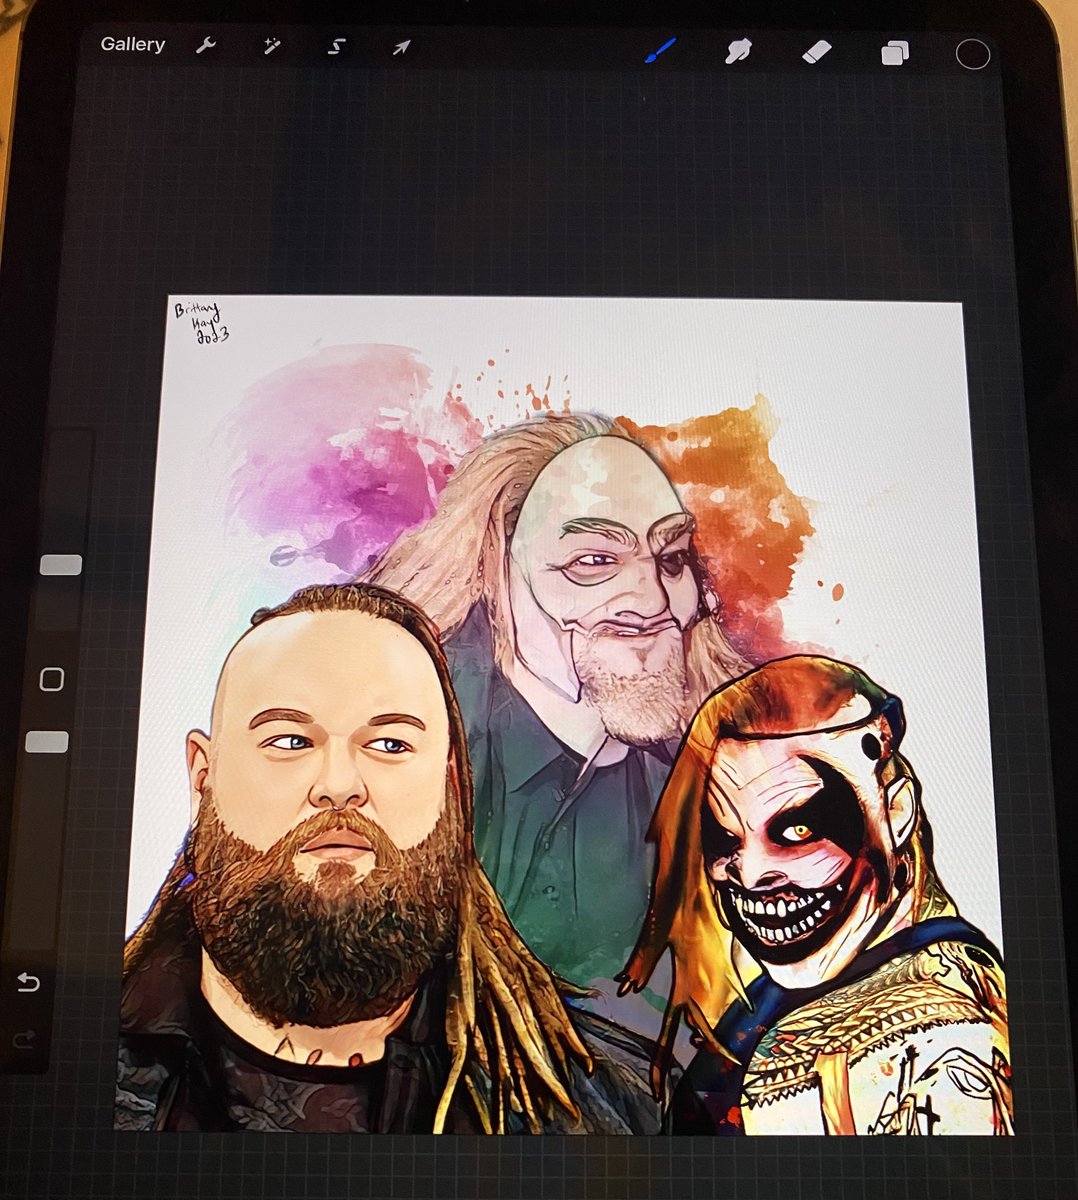 Another piece I’ve been working on for a while. New @Windham6 / Howdy / Fiend drawing. ✍🏻✍🏻✍🏻 #BrayWyatt #UncleHowdy #TheFiend